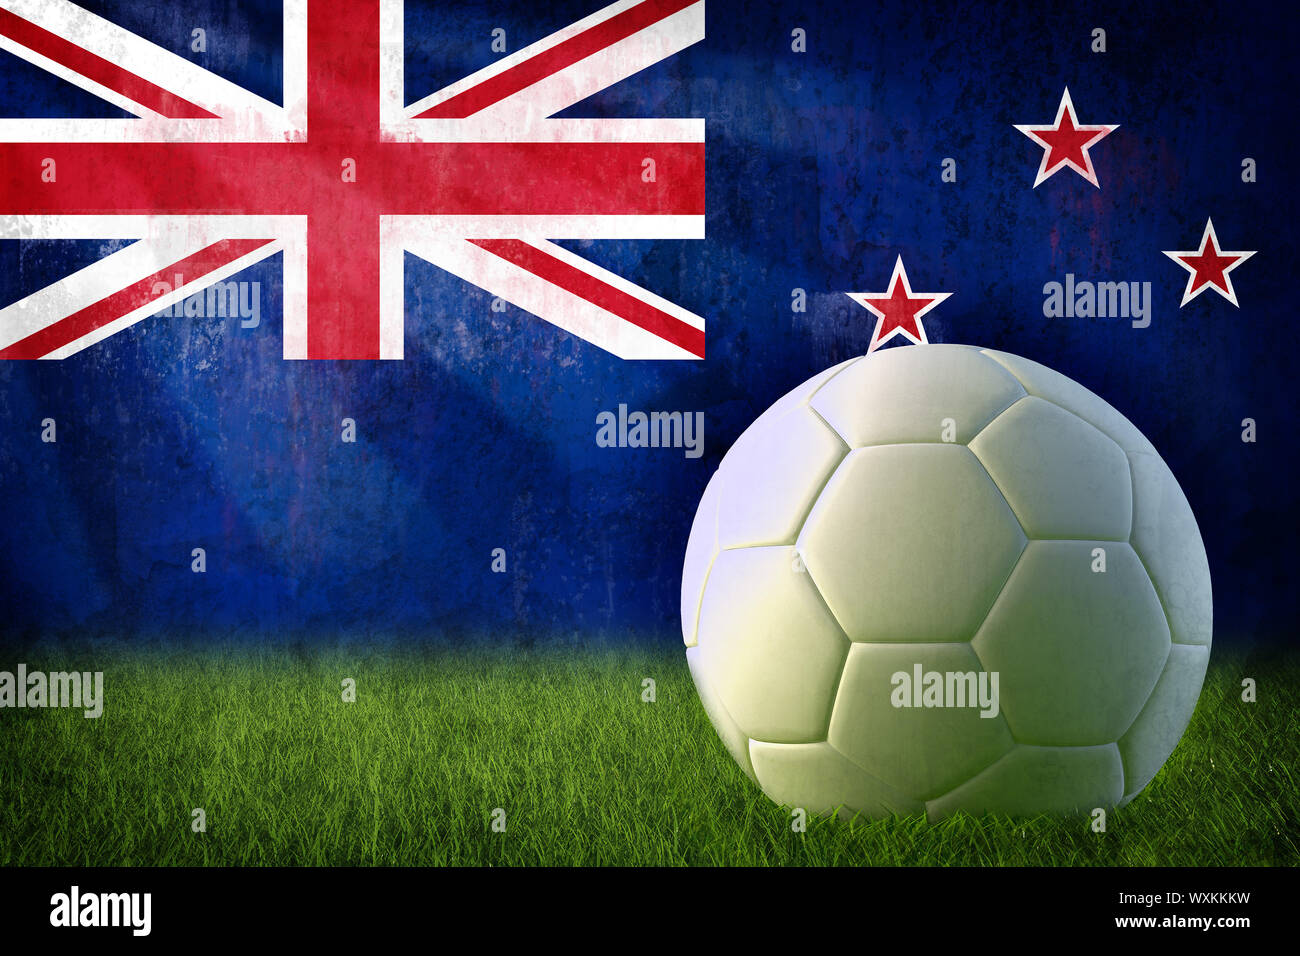 Grunge New Zeland flag on wall and soccer ball Stock Photo